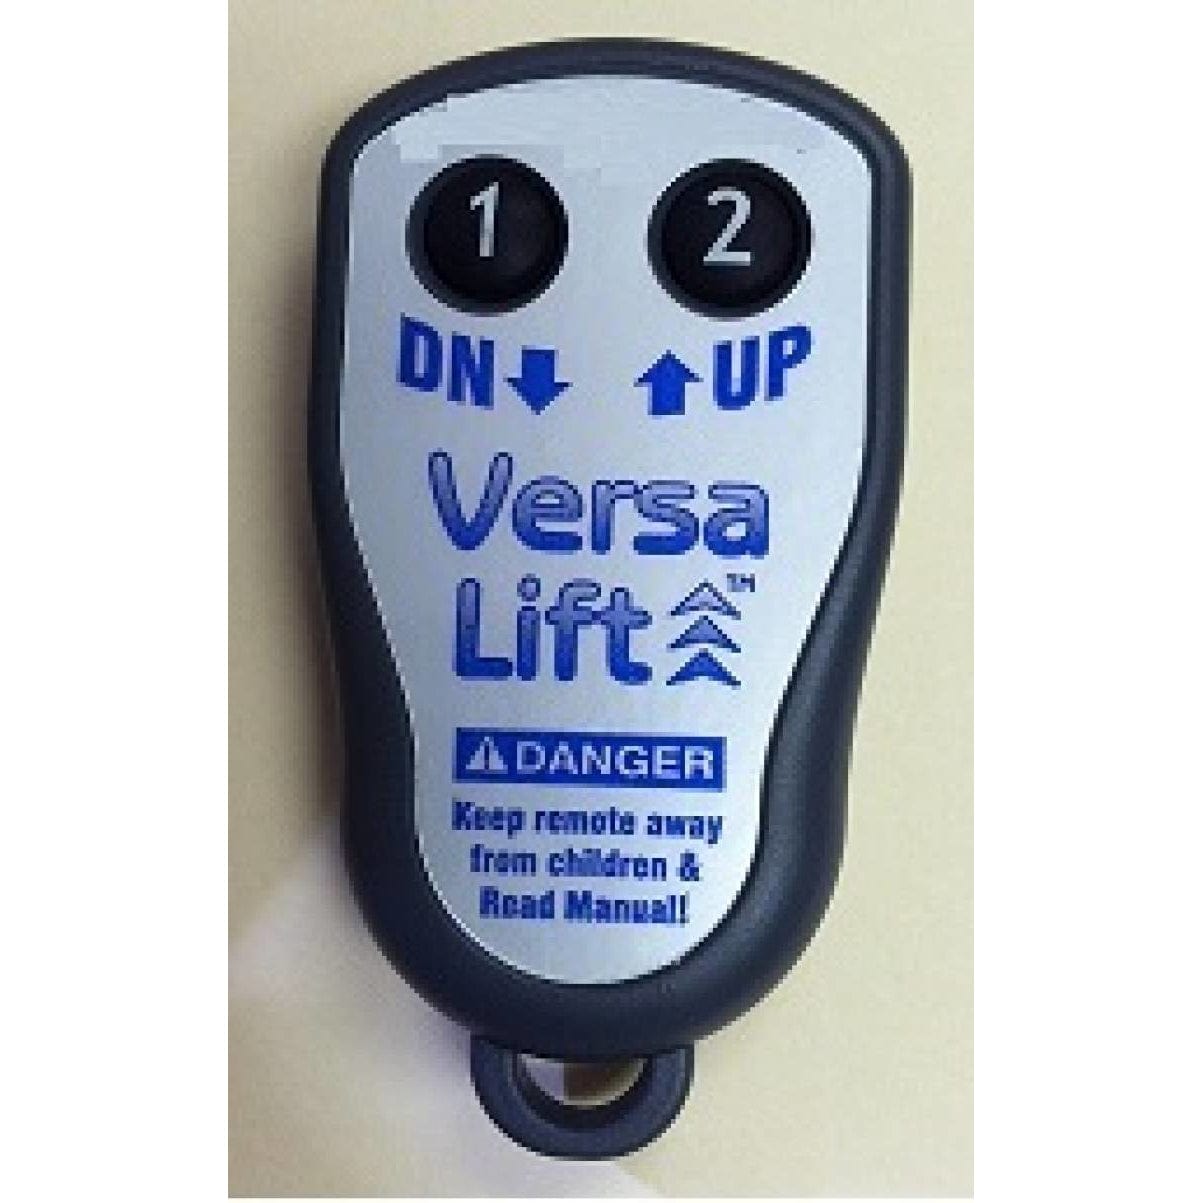 Versa Lift Extra Wireless Remote Controller, WR-2432-N